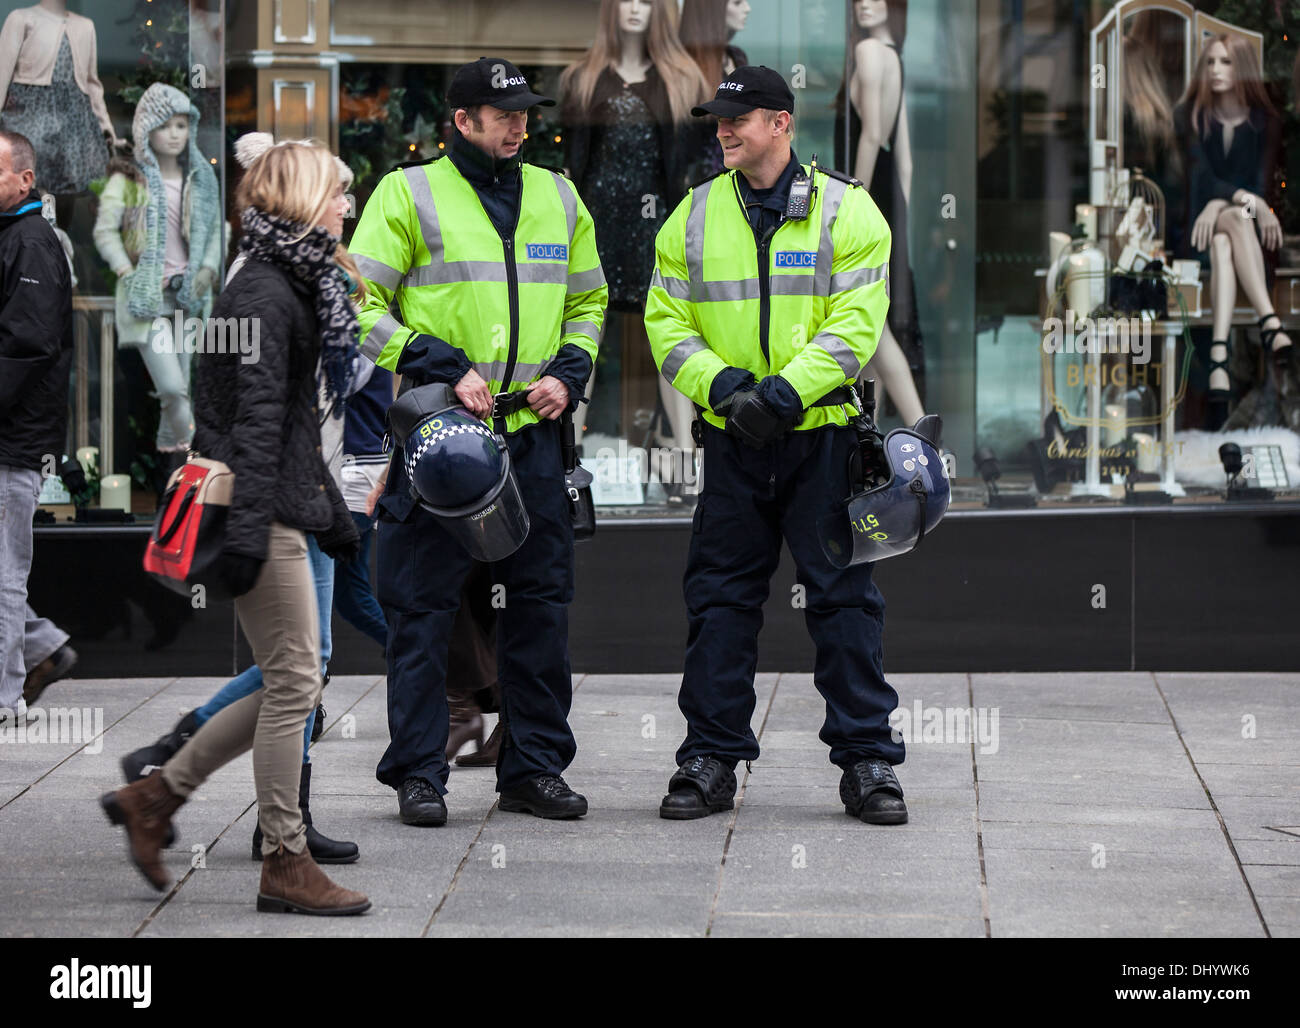 Two British policemen stand holding riot helmets. Stock Photo